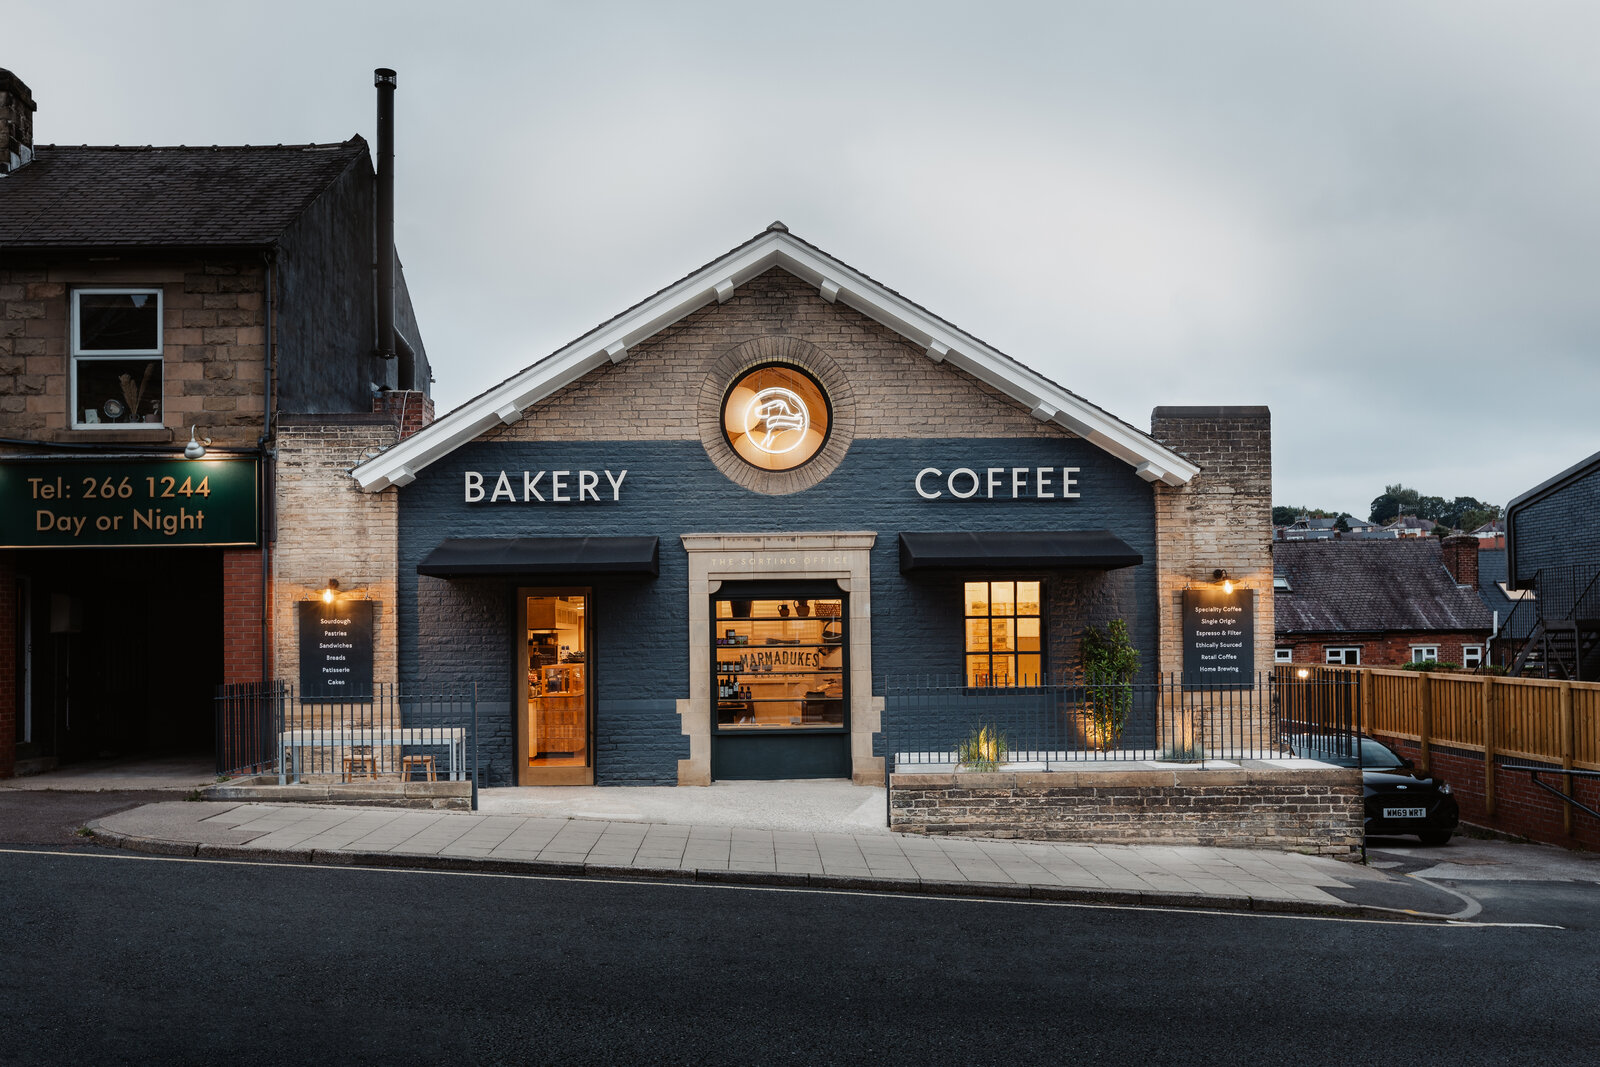 Marmadukes - 93ft designed a cafe store, bakery and community hub in a former sorting office